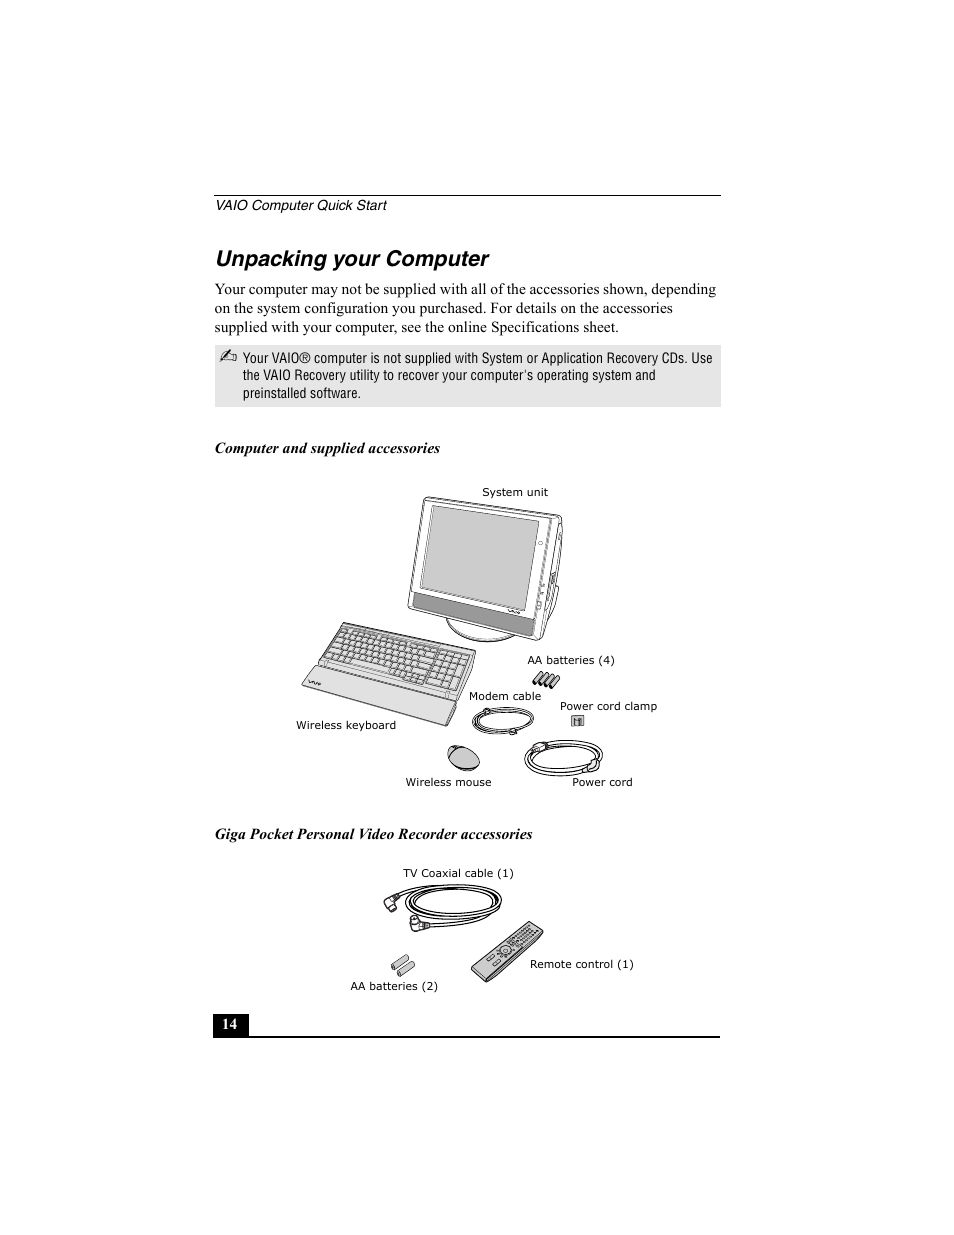 Unpacking your computer | Sony PCV-V100G User Manual | Page 14 / 48